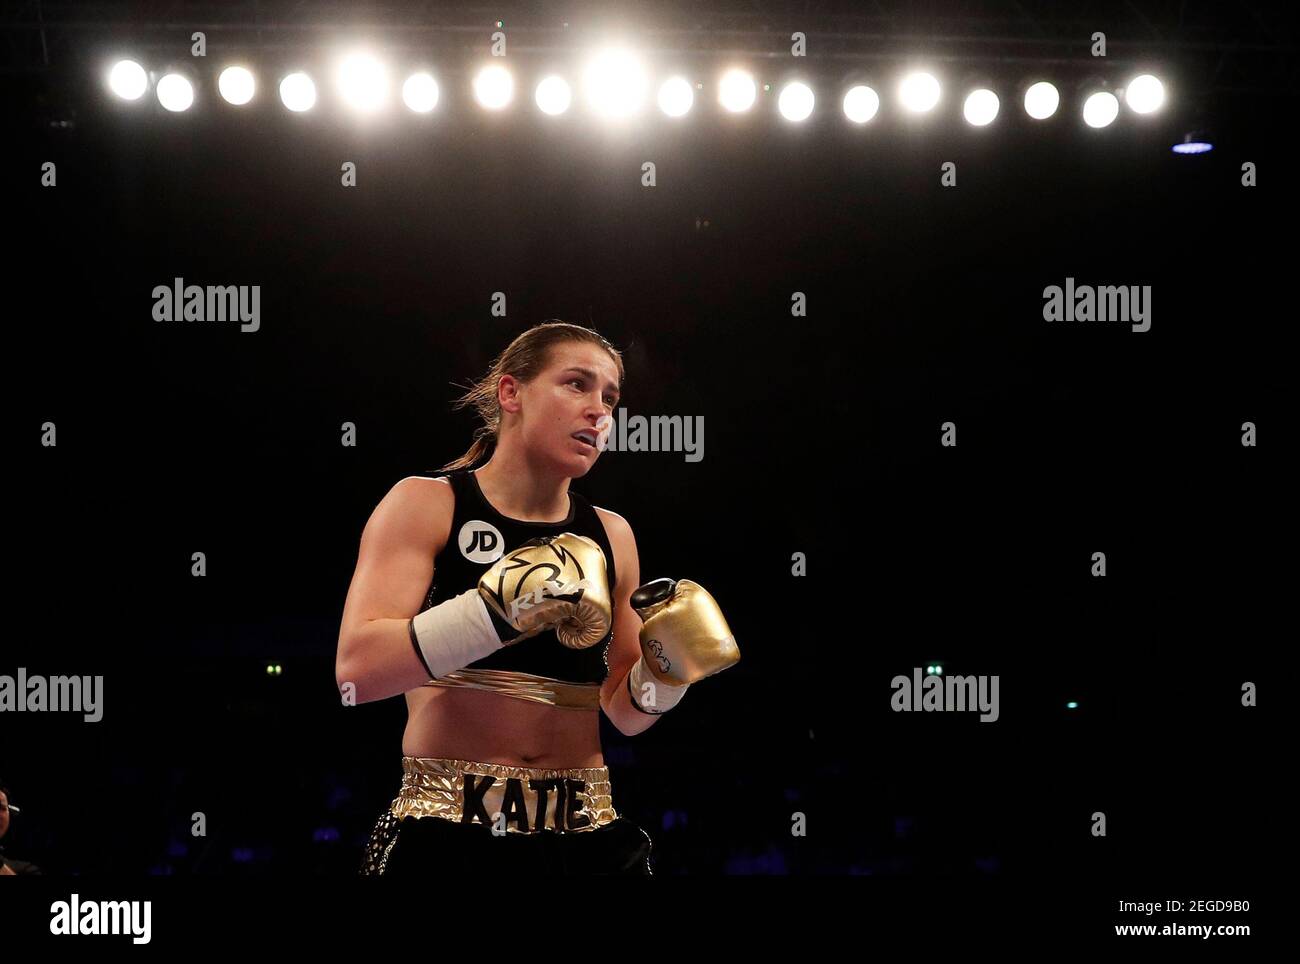 Britain Boxing - Katie Taylor v Milena Koleva - Manchester Arena - 25/3/17  Katie Taylor Action Images via Reuters / Lee Smith Livepic EDITORIAL USE  ONLY Stock Photo - Alamy